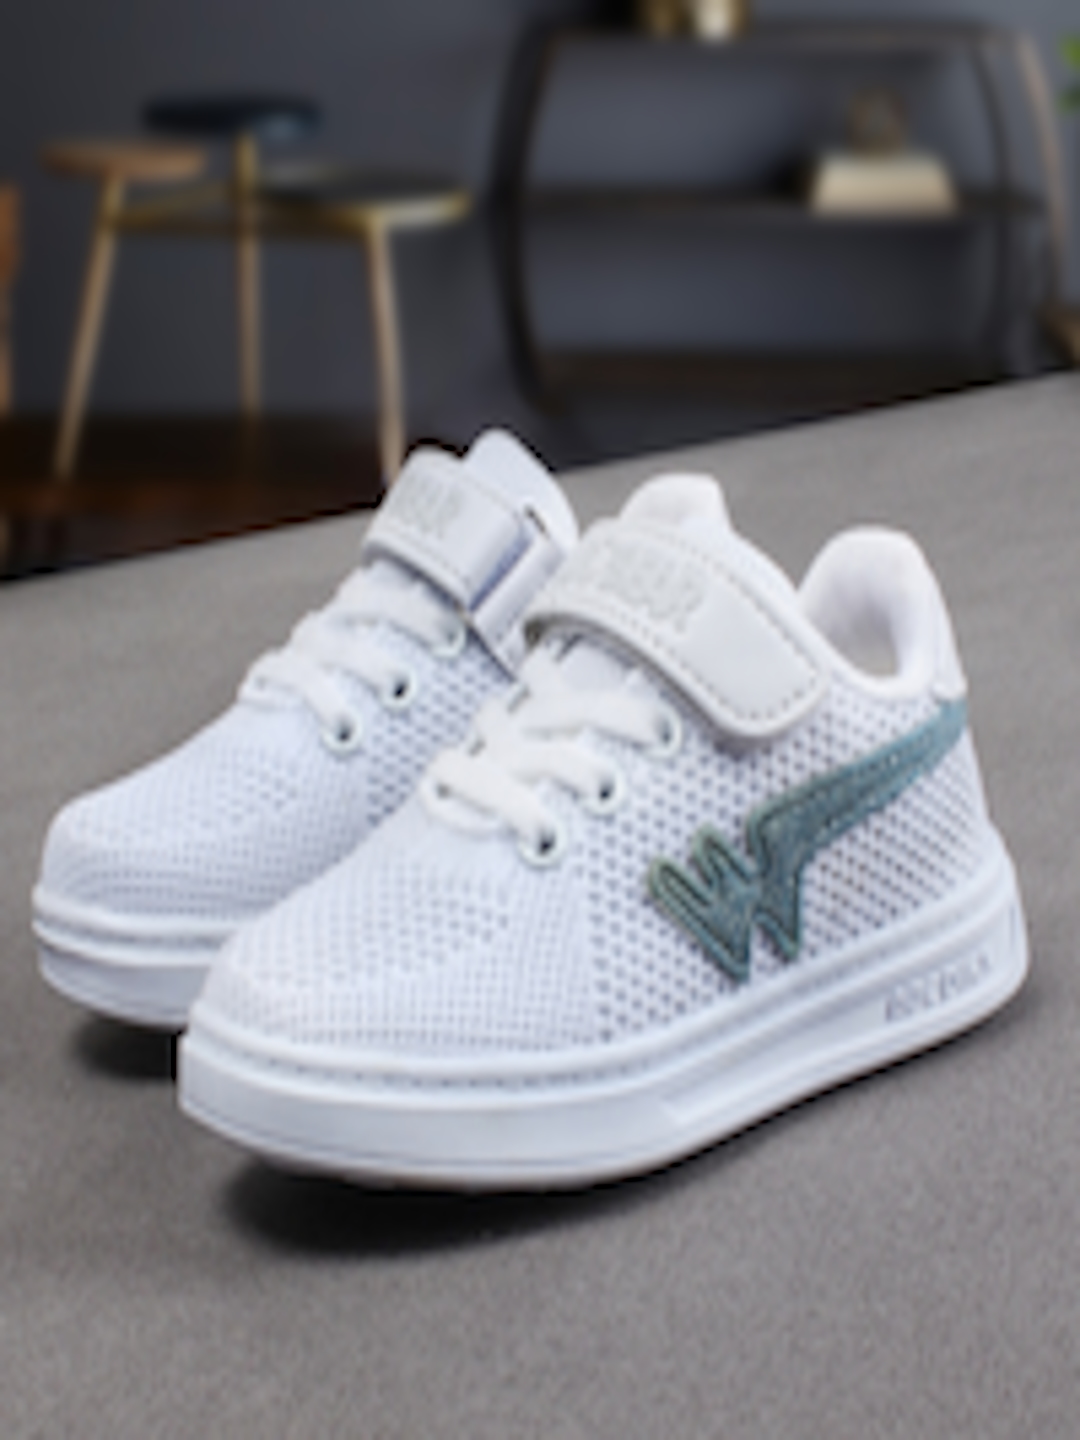 Buy Walktrendy Kids White Sneakers - Casual Shoes for ...